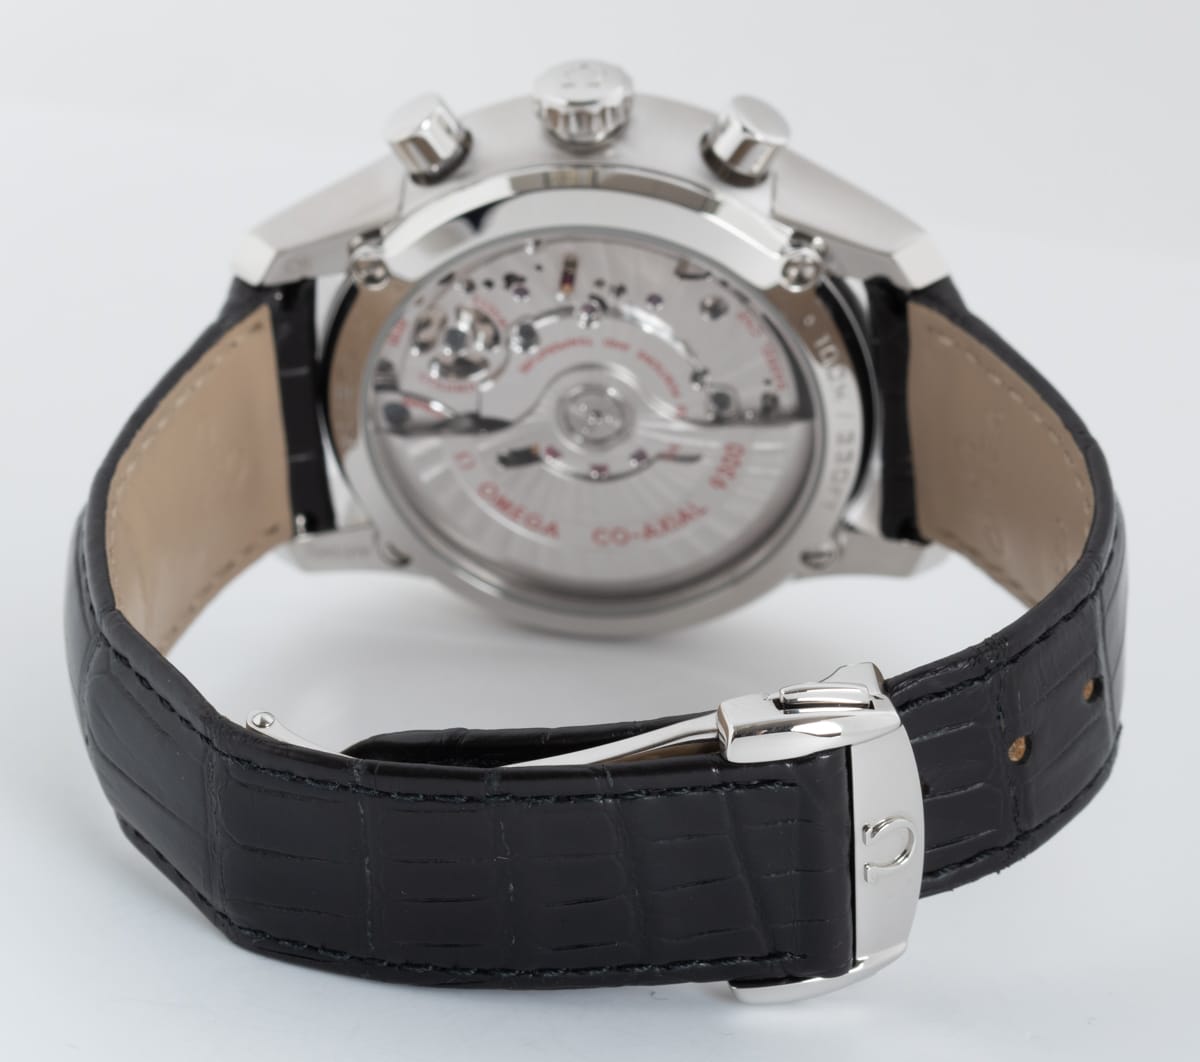 Rear / Band View of DeVille Chronograph